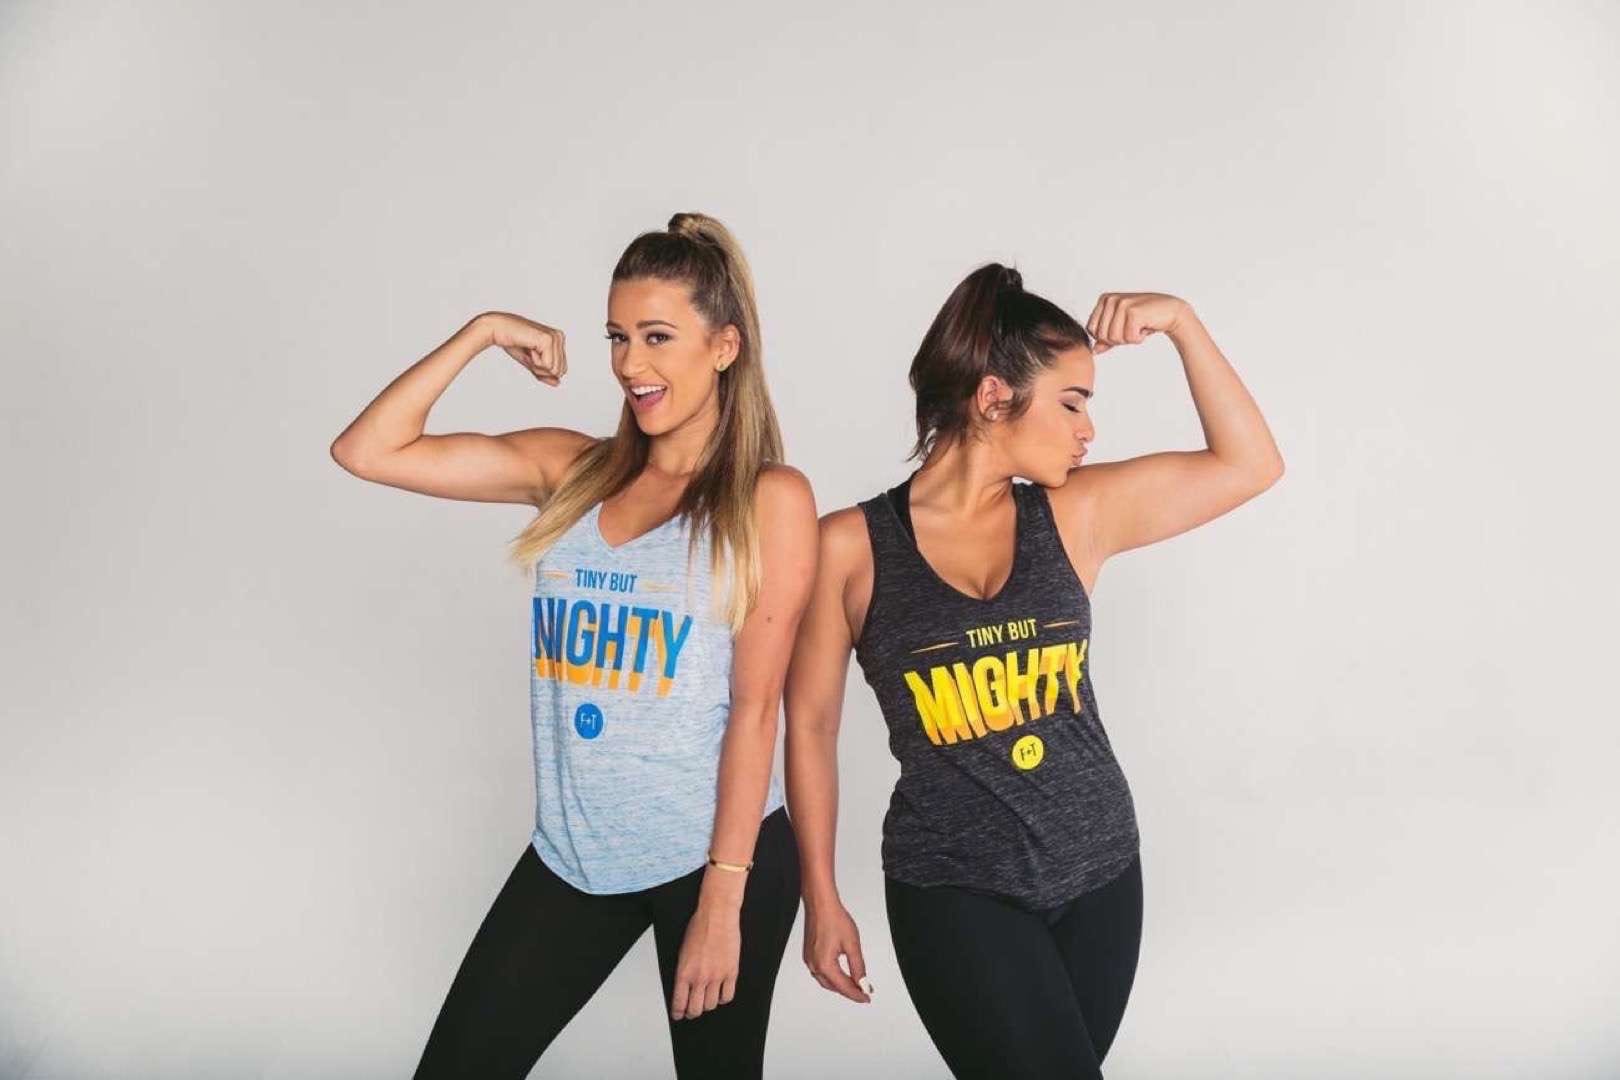 Nicole Mejia's Thick + Fit Two young women in loose tops and spandex tights posing for camera showing their muscles